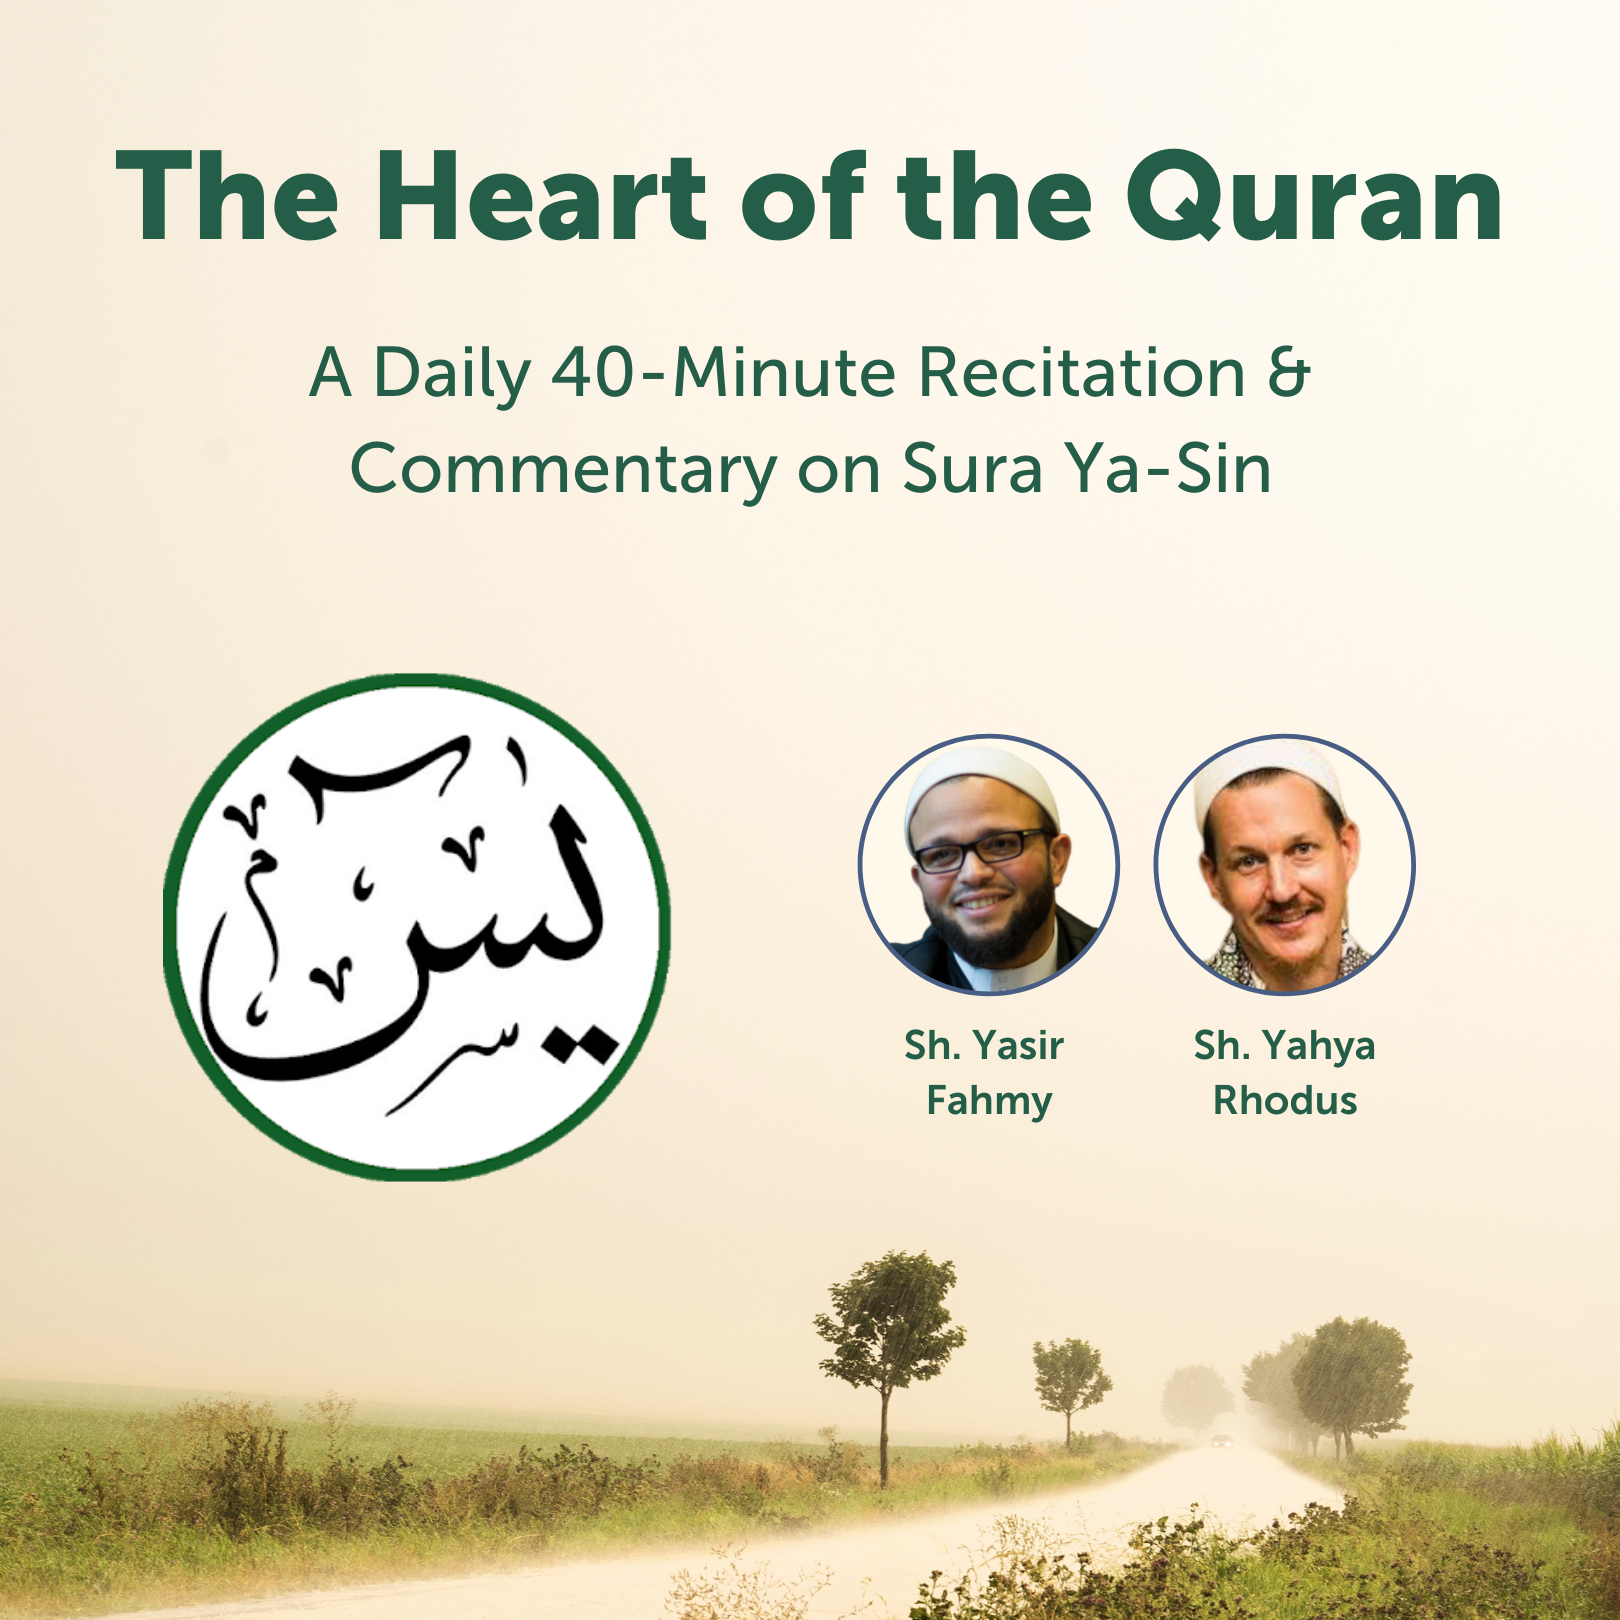 squarespace_Heart of the Quran.png